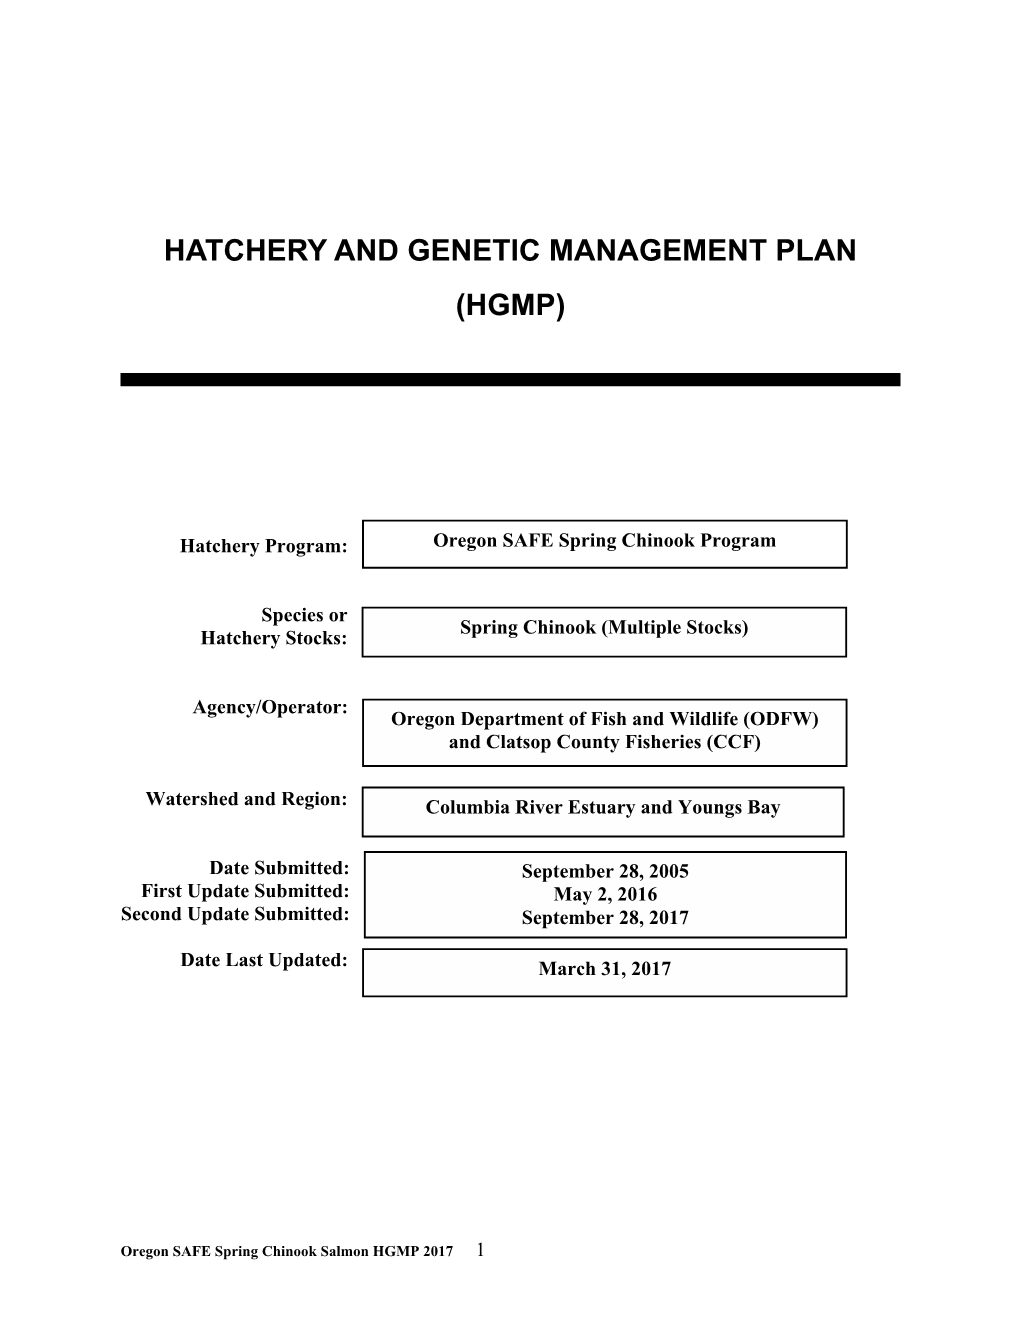 Hatchery and Genetic Management Plan (Hgmp)